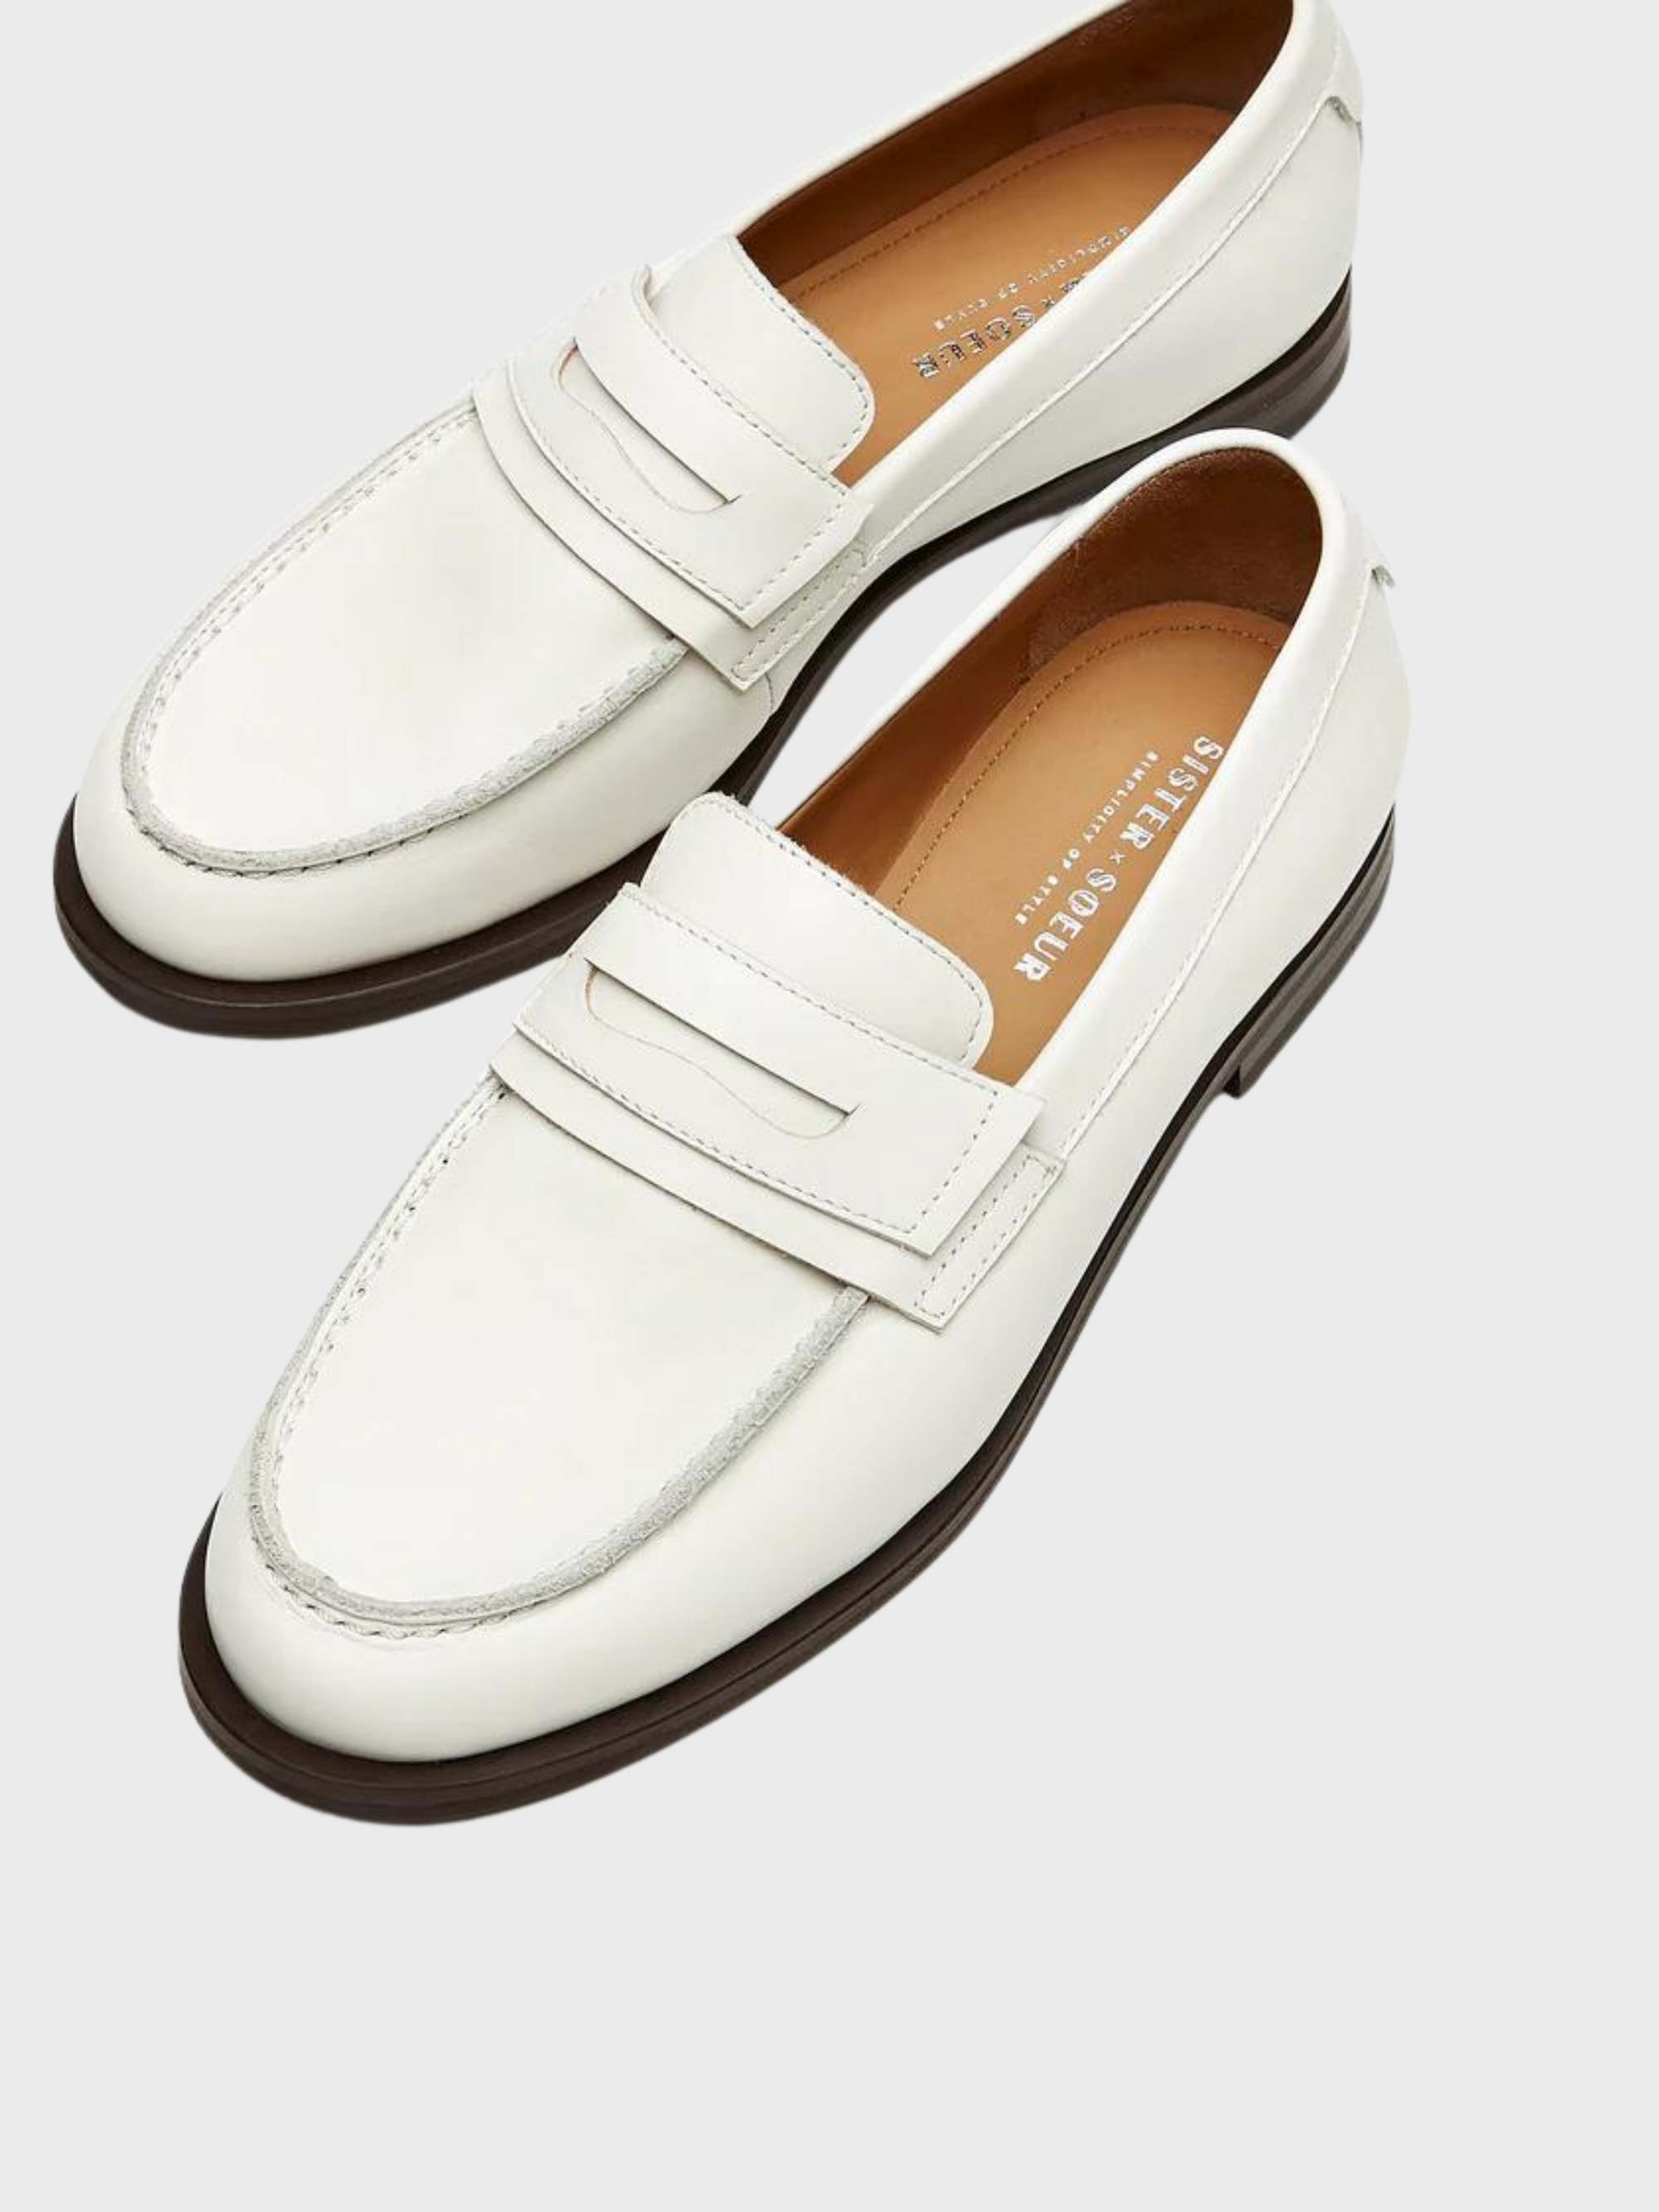 Sister Soeur Mavis Loafer Cream. Shop Women's Sneakers at West of Woodward  Online or Visit Our Boutique in Yaletown, Vancouver, Canada.